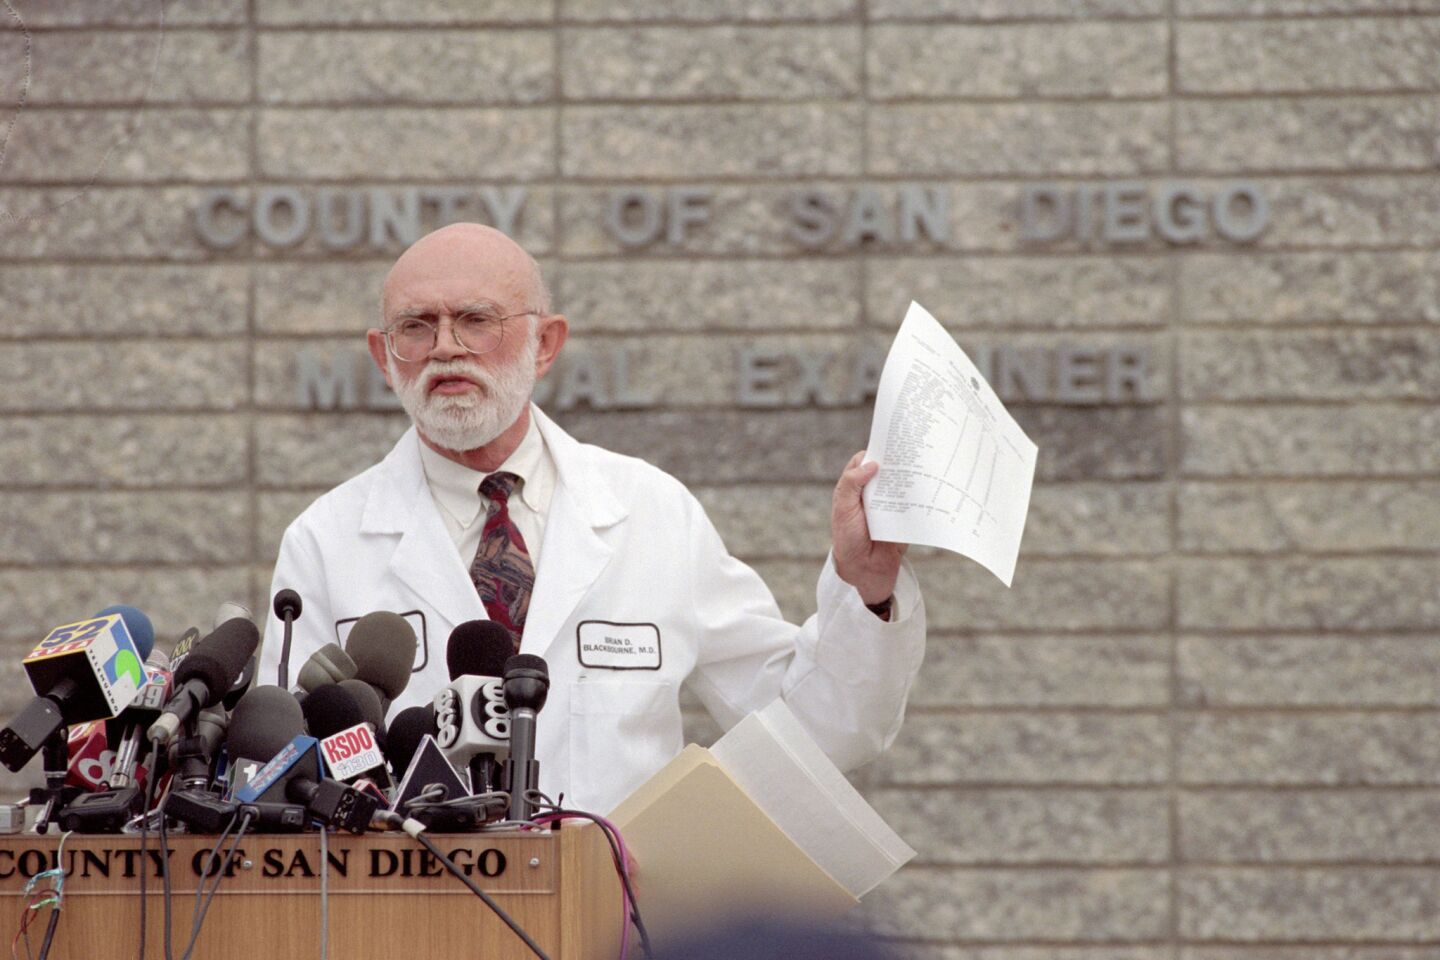 On March 31, 1997, county Medical Examiner Brian Blackbourne showed the updated list of names of the 39 Heaven's Gate members who died in a mass suicide that month in Rancho Santa Fe.